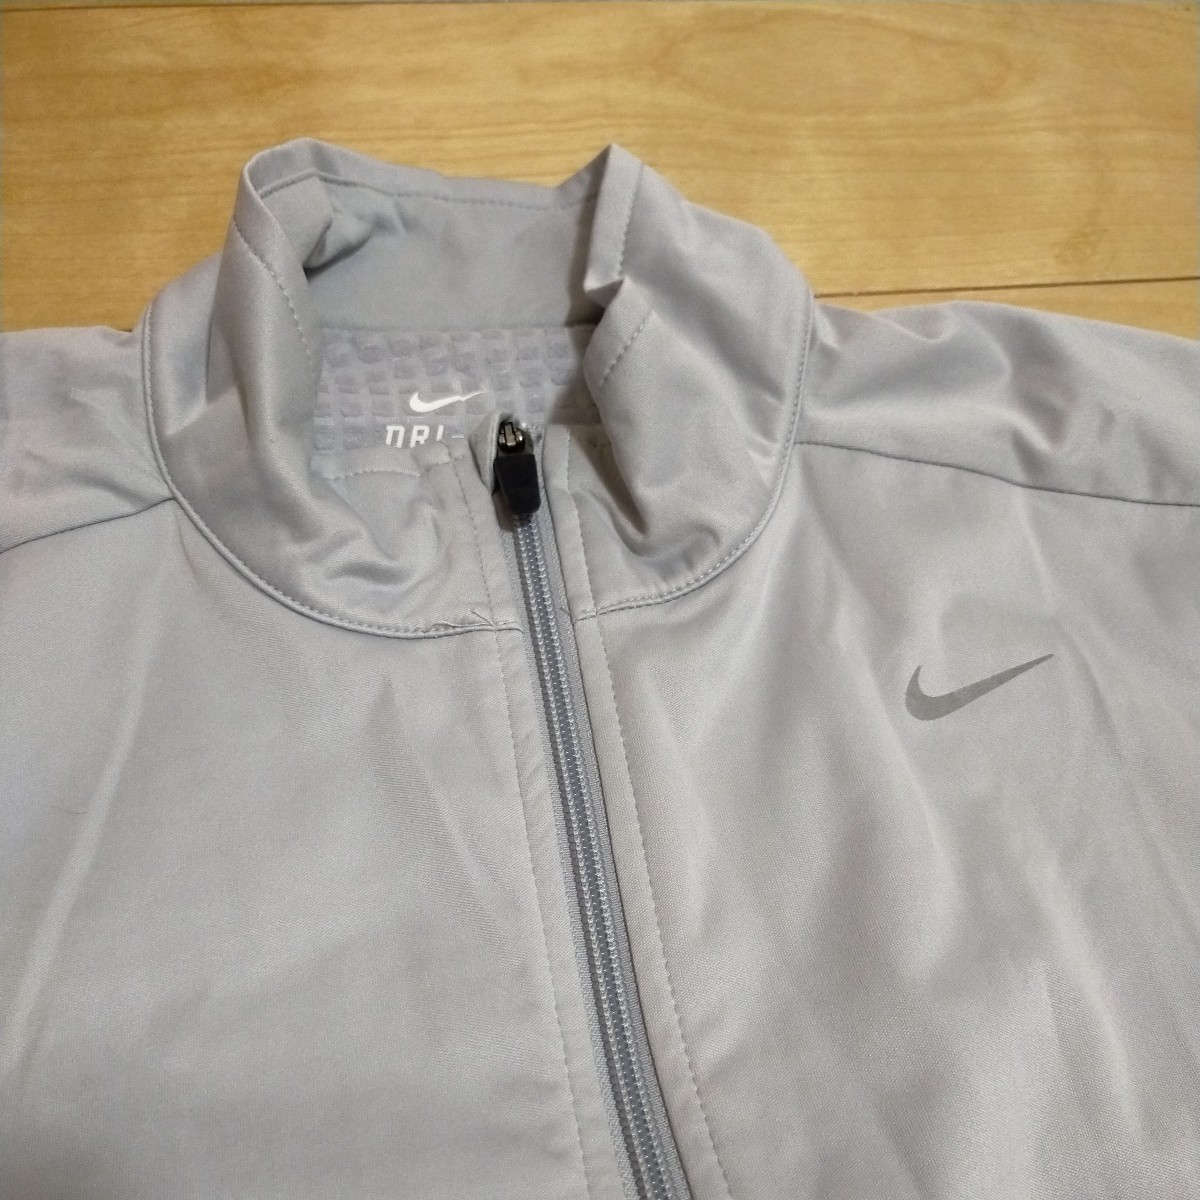 NIKE ELEMENT dry Fit running jersey 